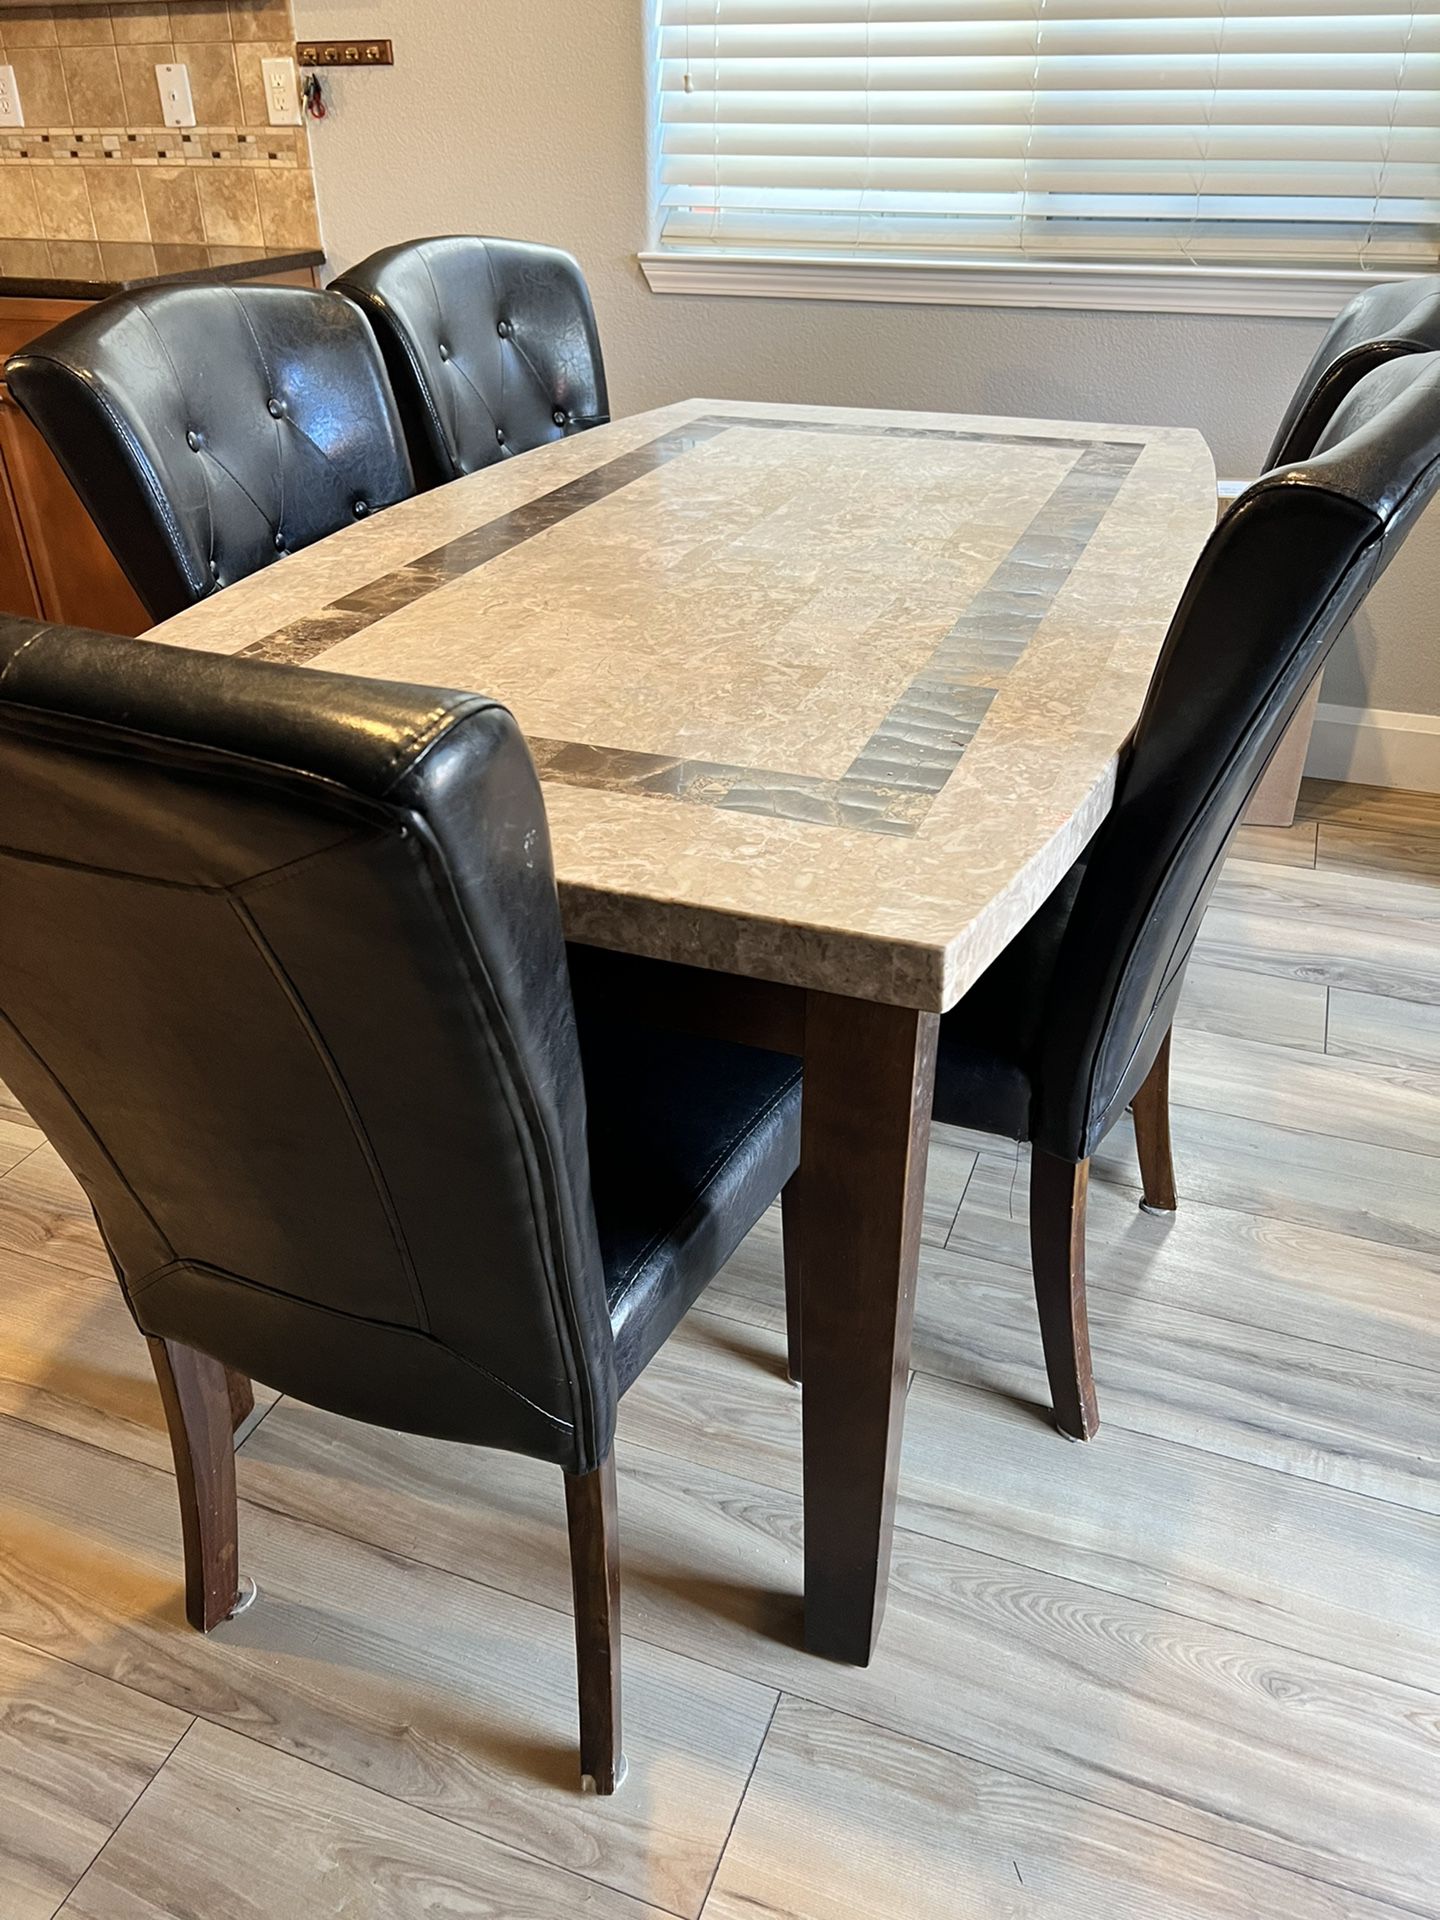 Dining Table with 5 Chairs Gently Used $200 Pick Up Today